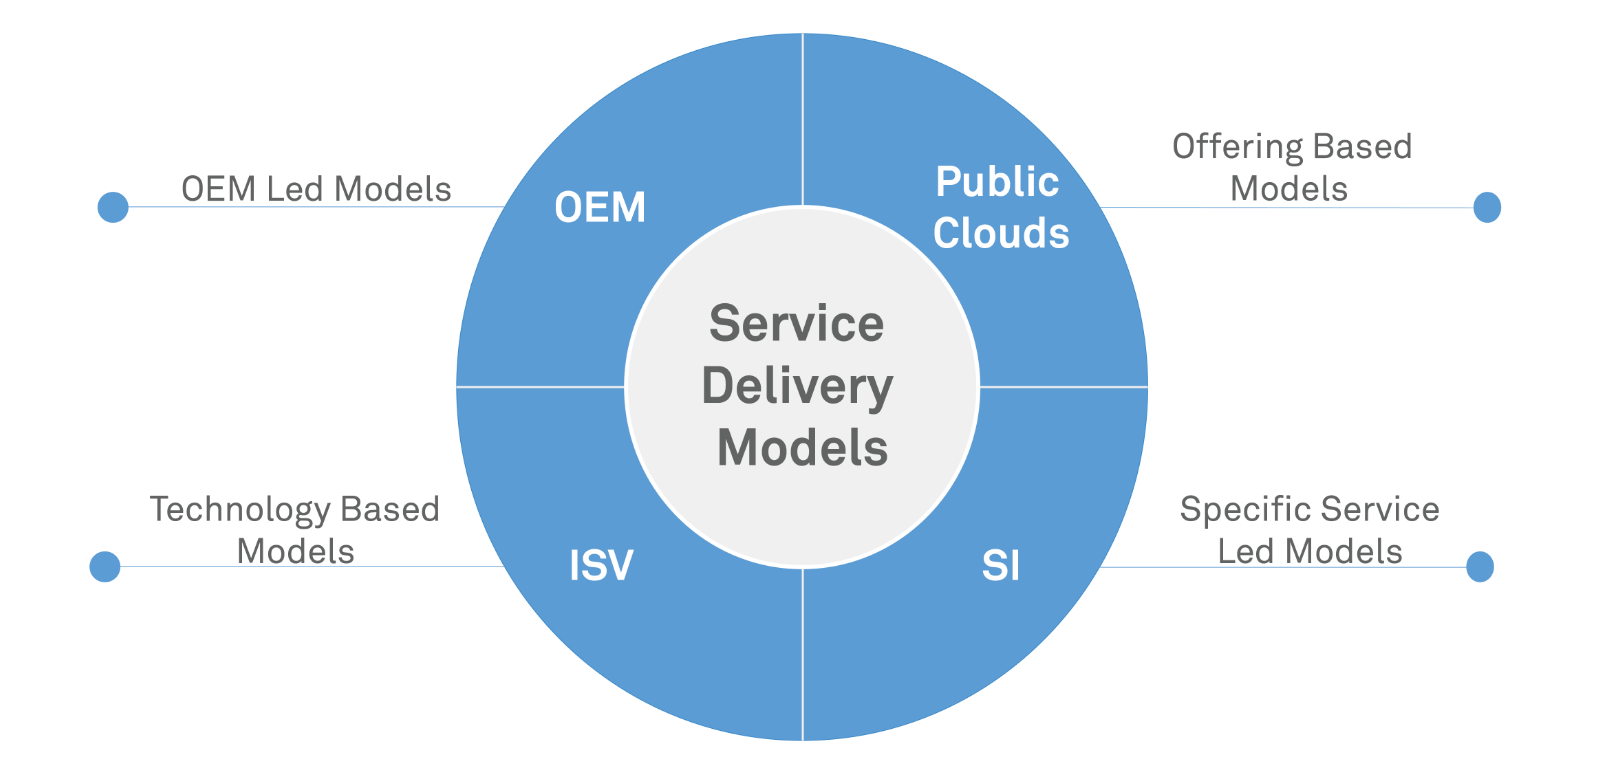 Unified digital delivery model for telco service providers